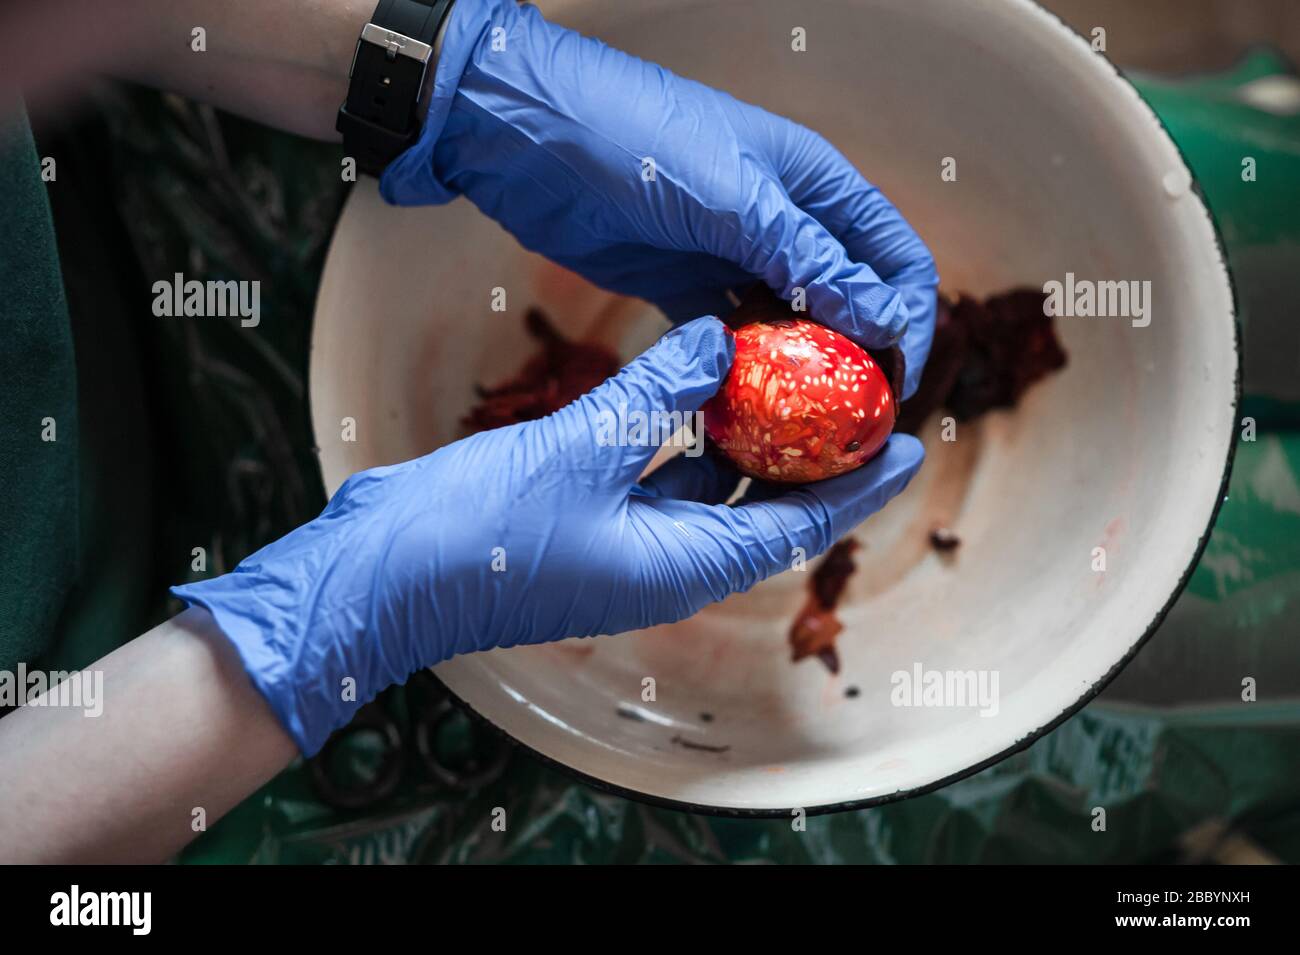 A hard boiled Easter egg that has been boiled in dye with onion skin and linseed to create beautiful and unique patterns, is unwrapped from gauze. Stock Photo